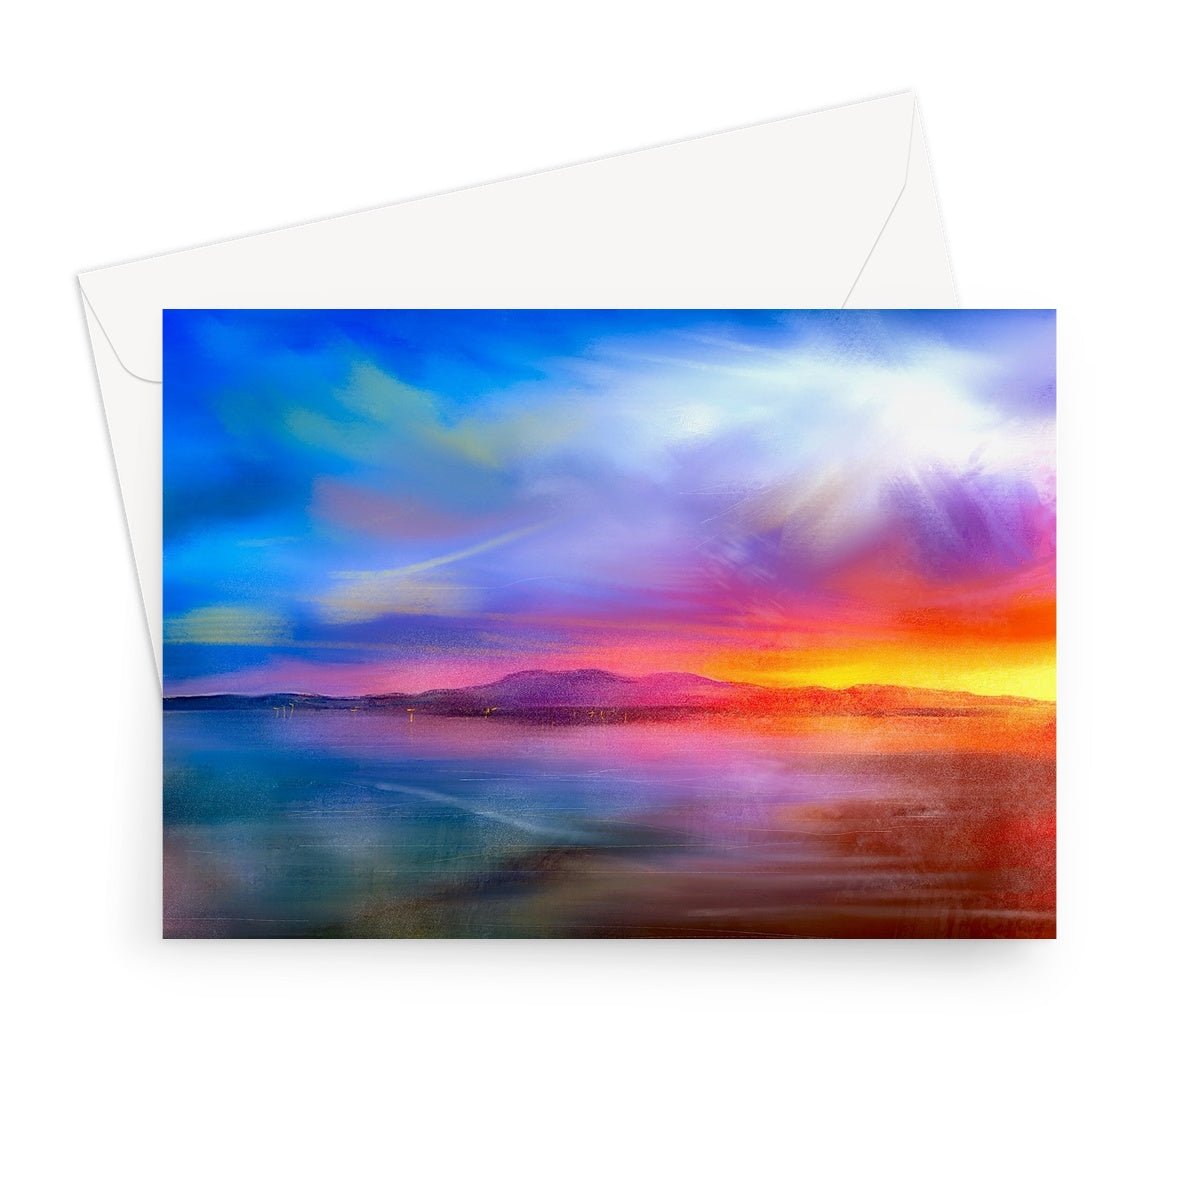 Arran Sunset Art Gift Greeting Card-Greetings Cards-Arran Art Gallery-7"x5"-10 Cards-Paintings, Prints, Homeware, Art Gifts From Scotland By Scottish Artist Kevin Hunter